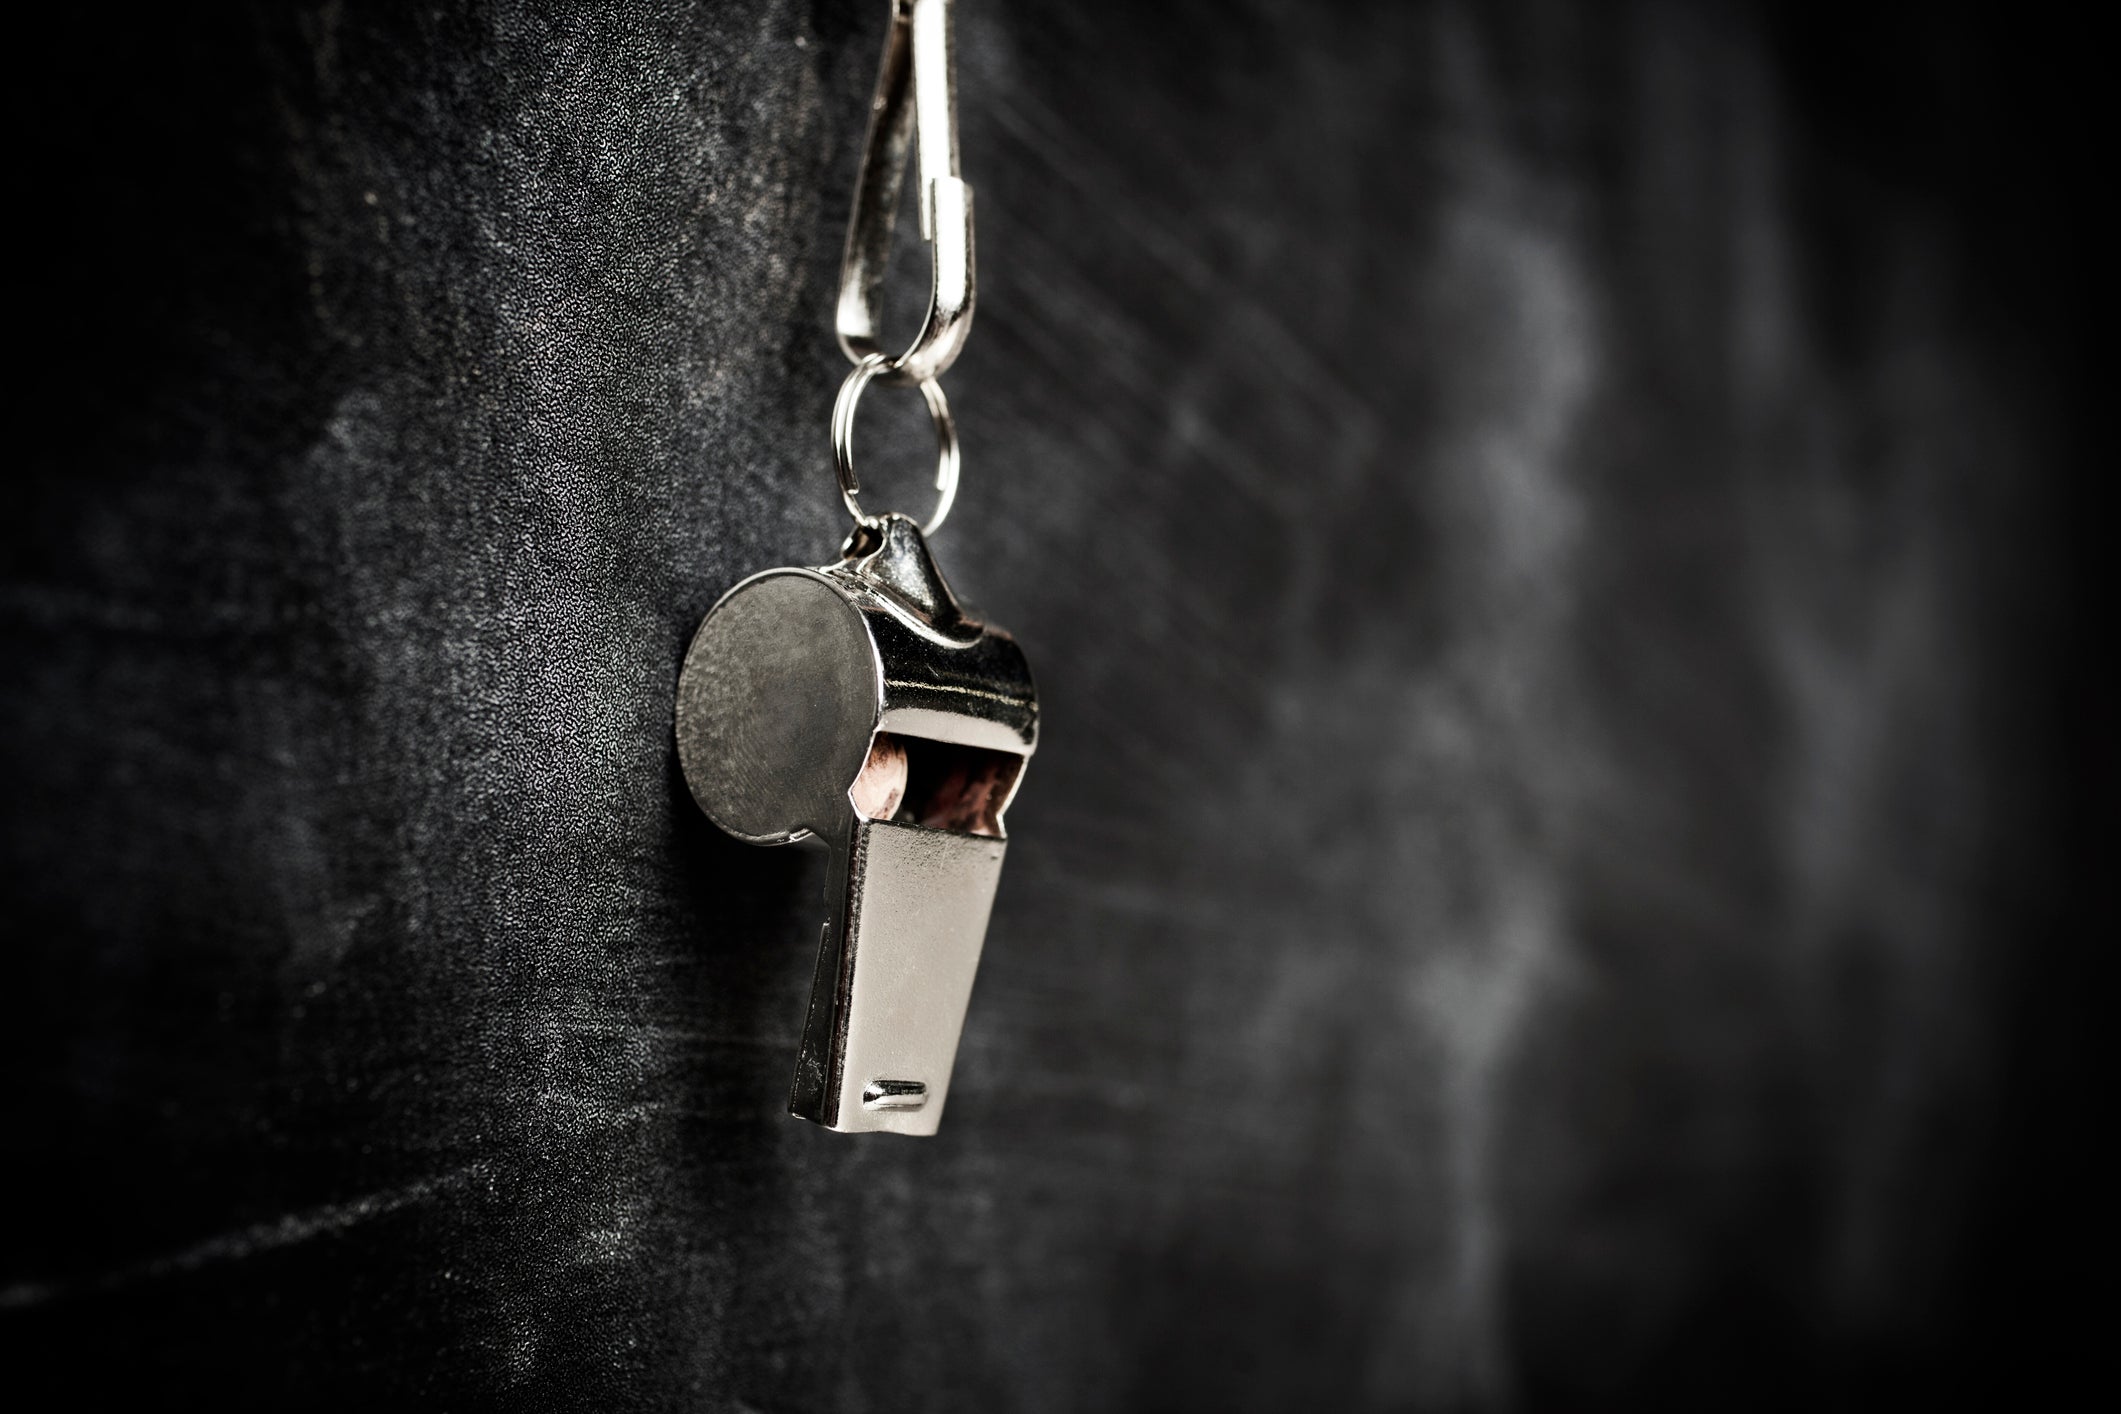 New whistleblower protections – are you ready?